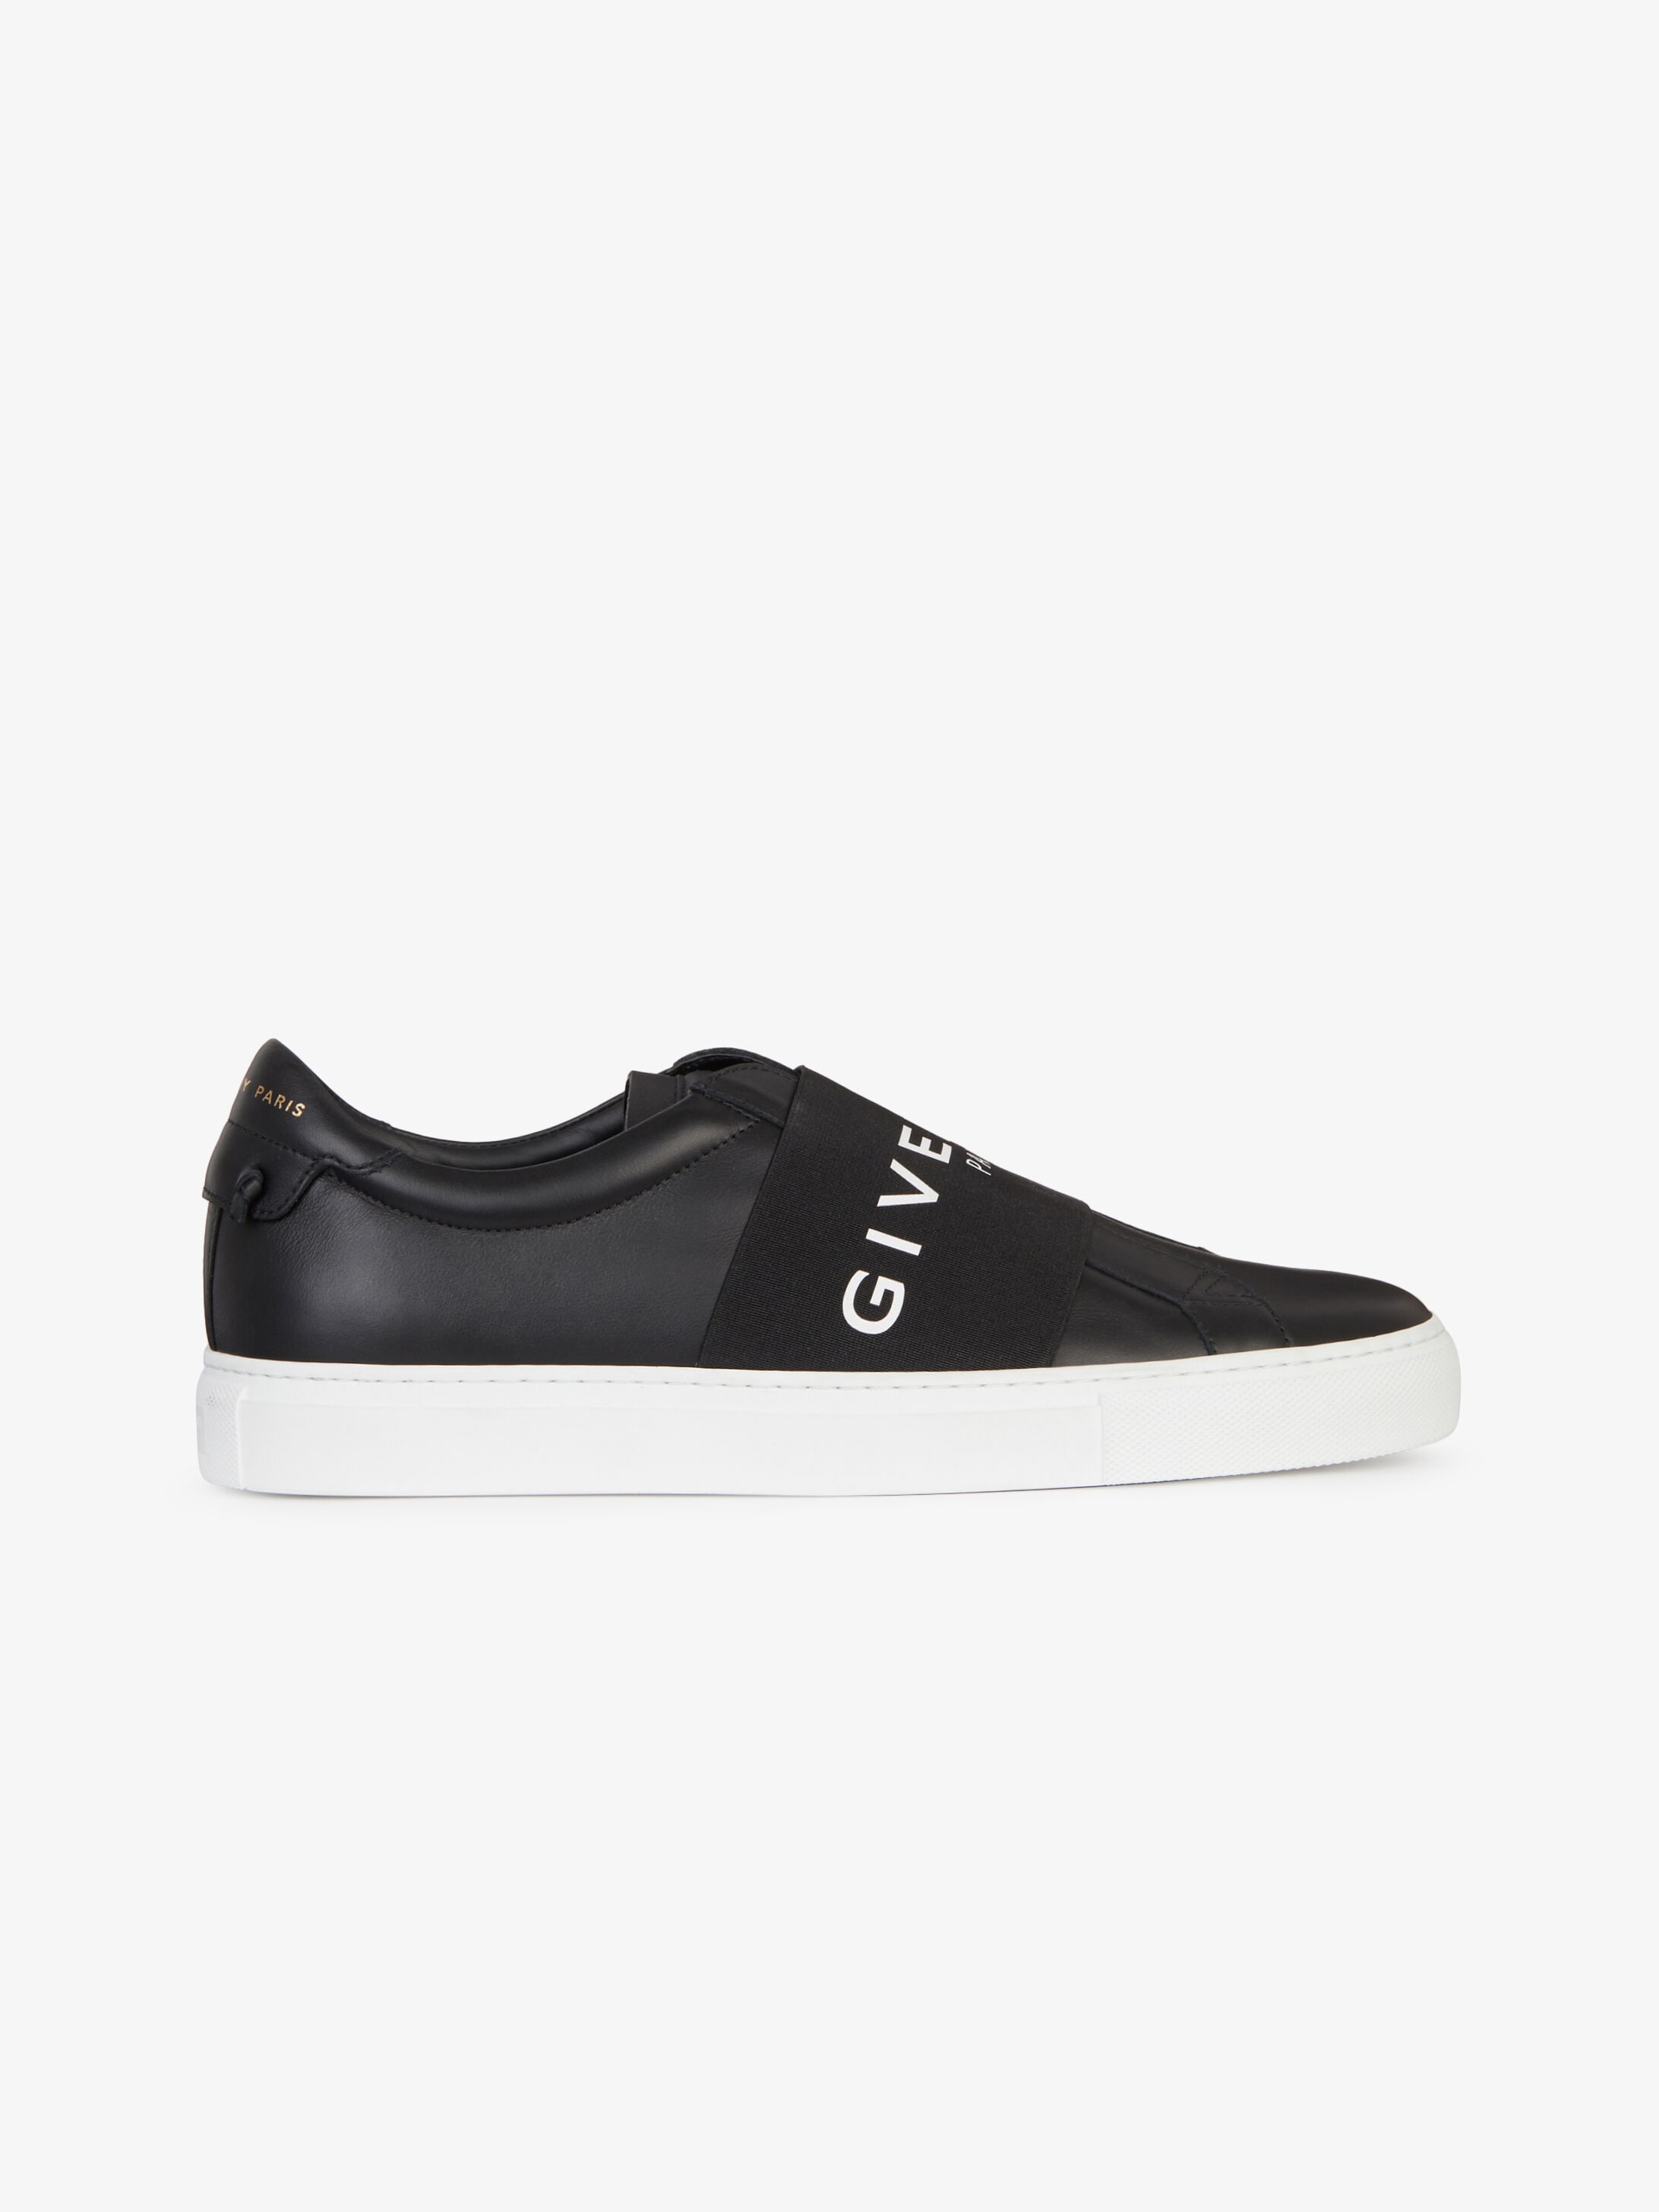 black and white givenchy sneakers